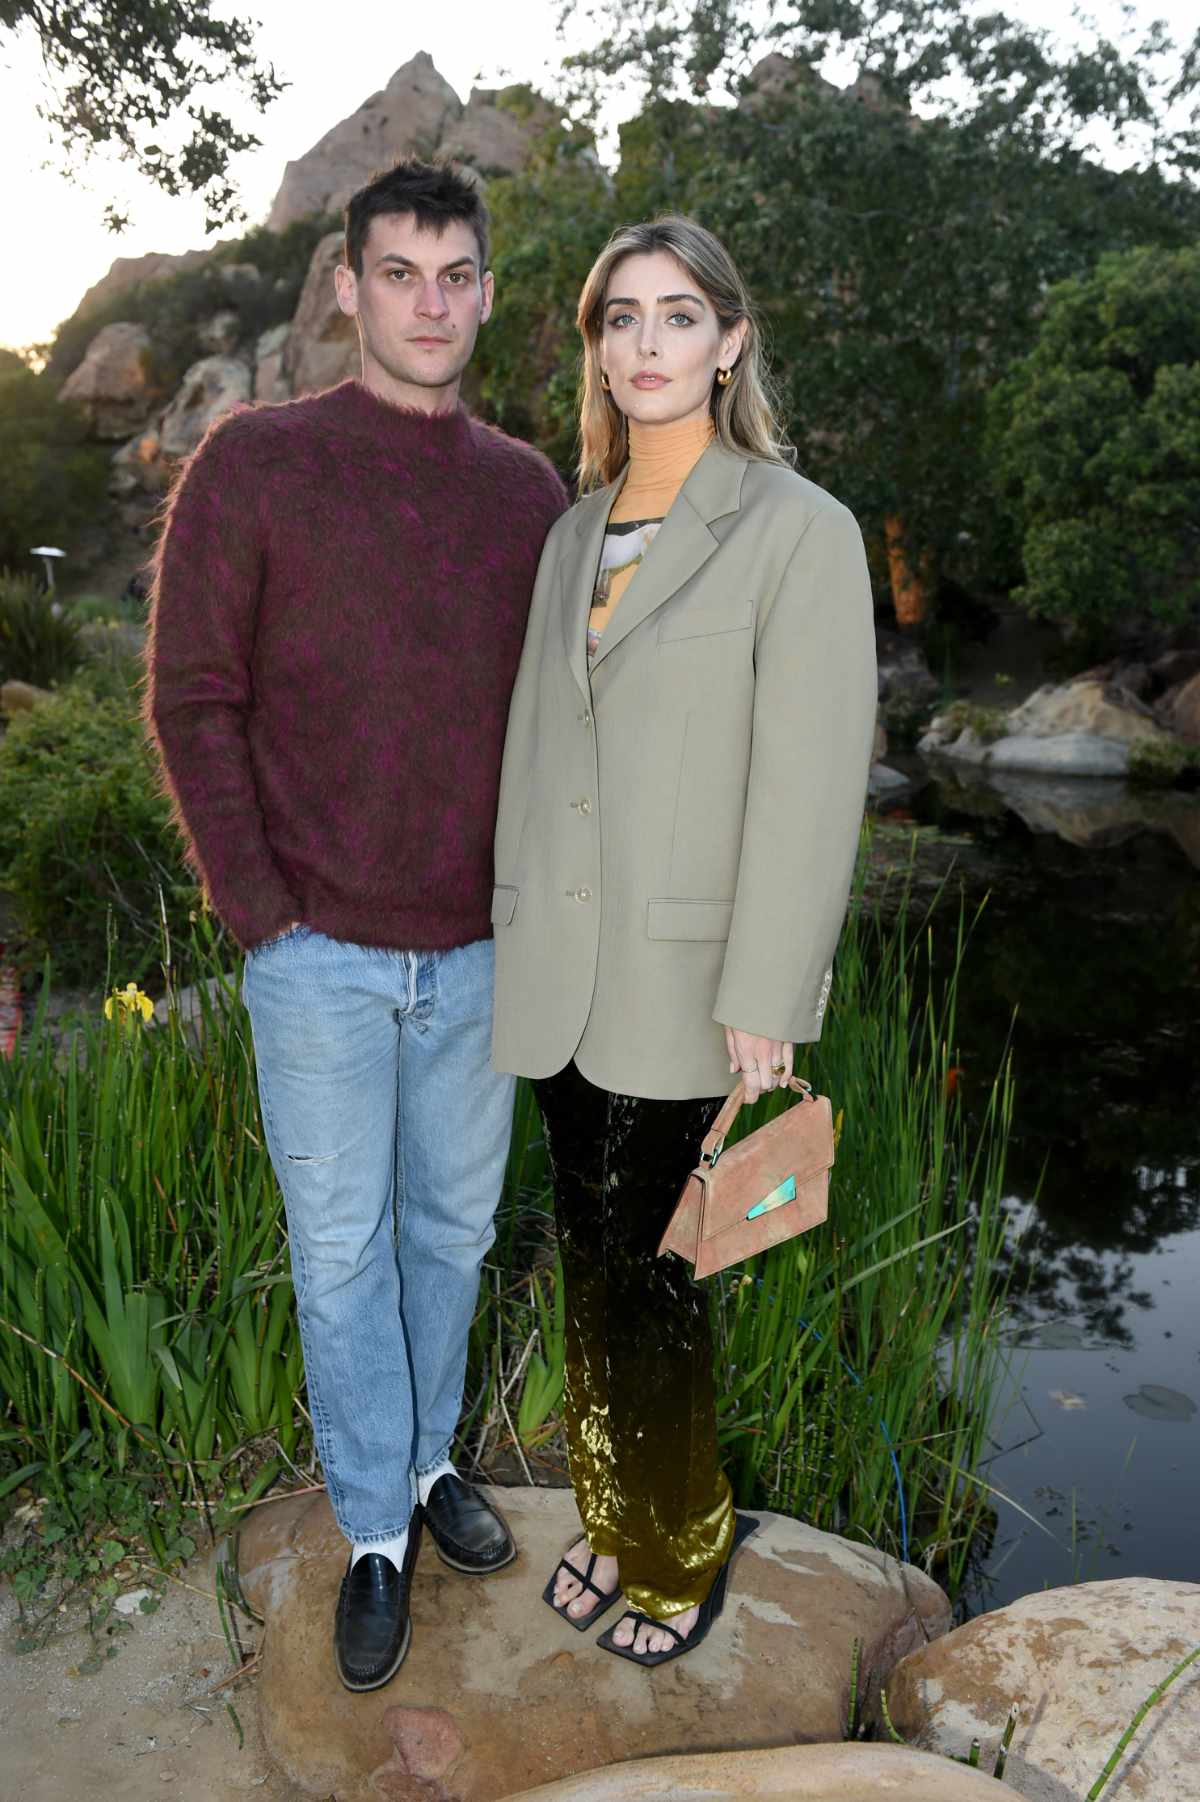 Acne Studios Hosted Los Angeles Sunset Ceremony In Celebration Of Collaboration With Angelo Plessas